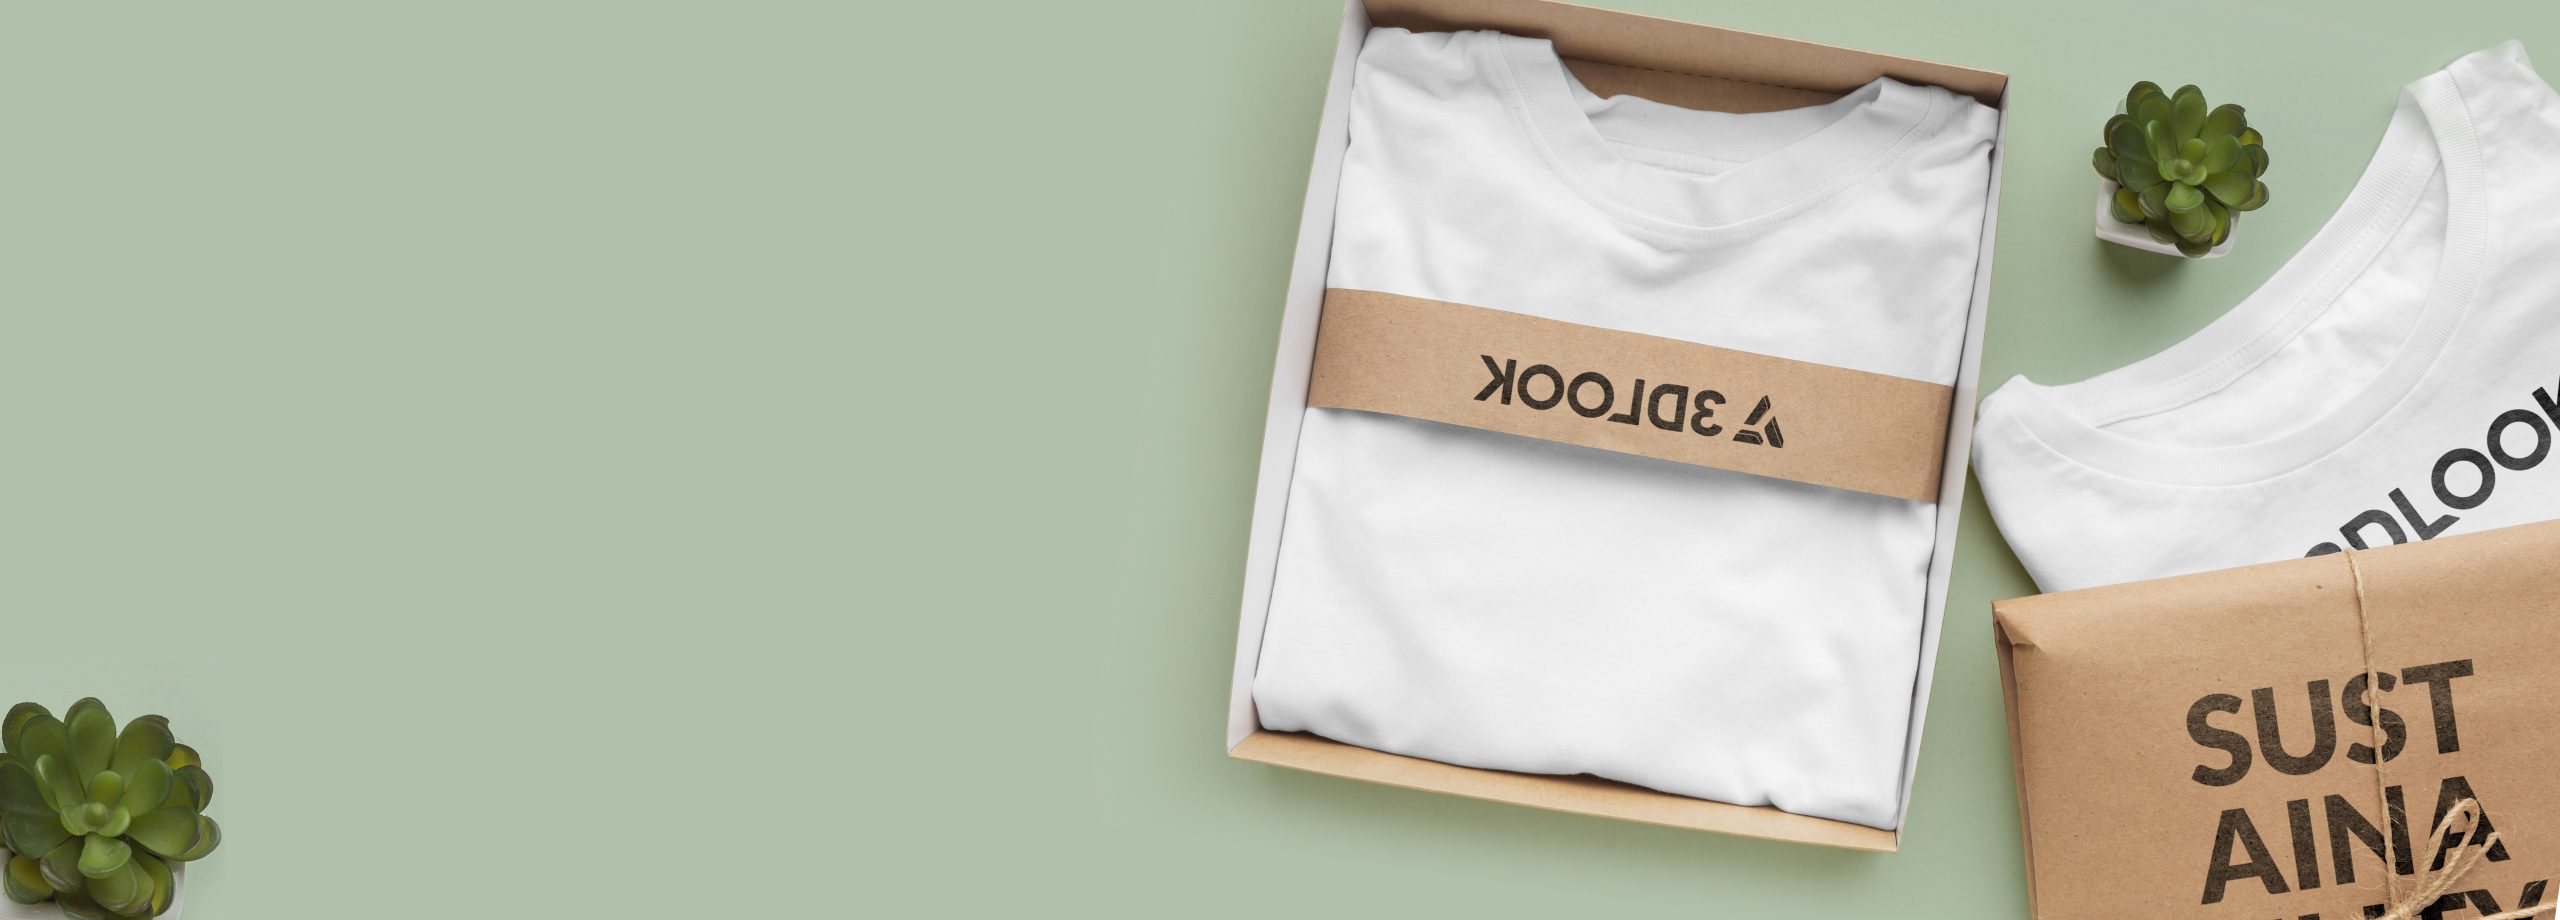 A white shirt in a box with a mission statement.